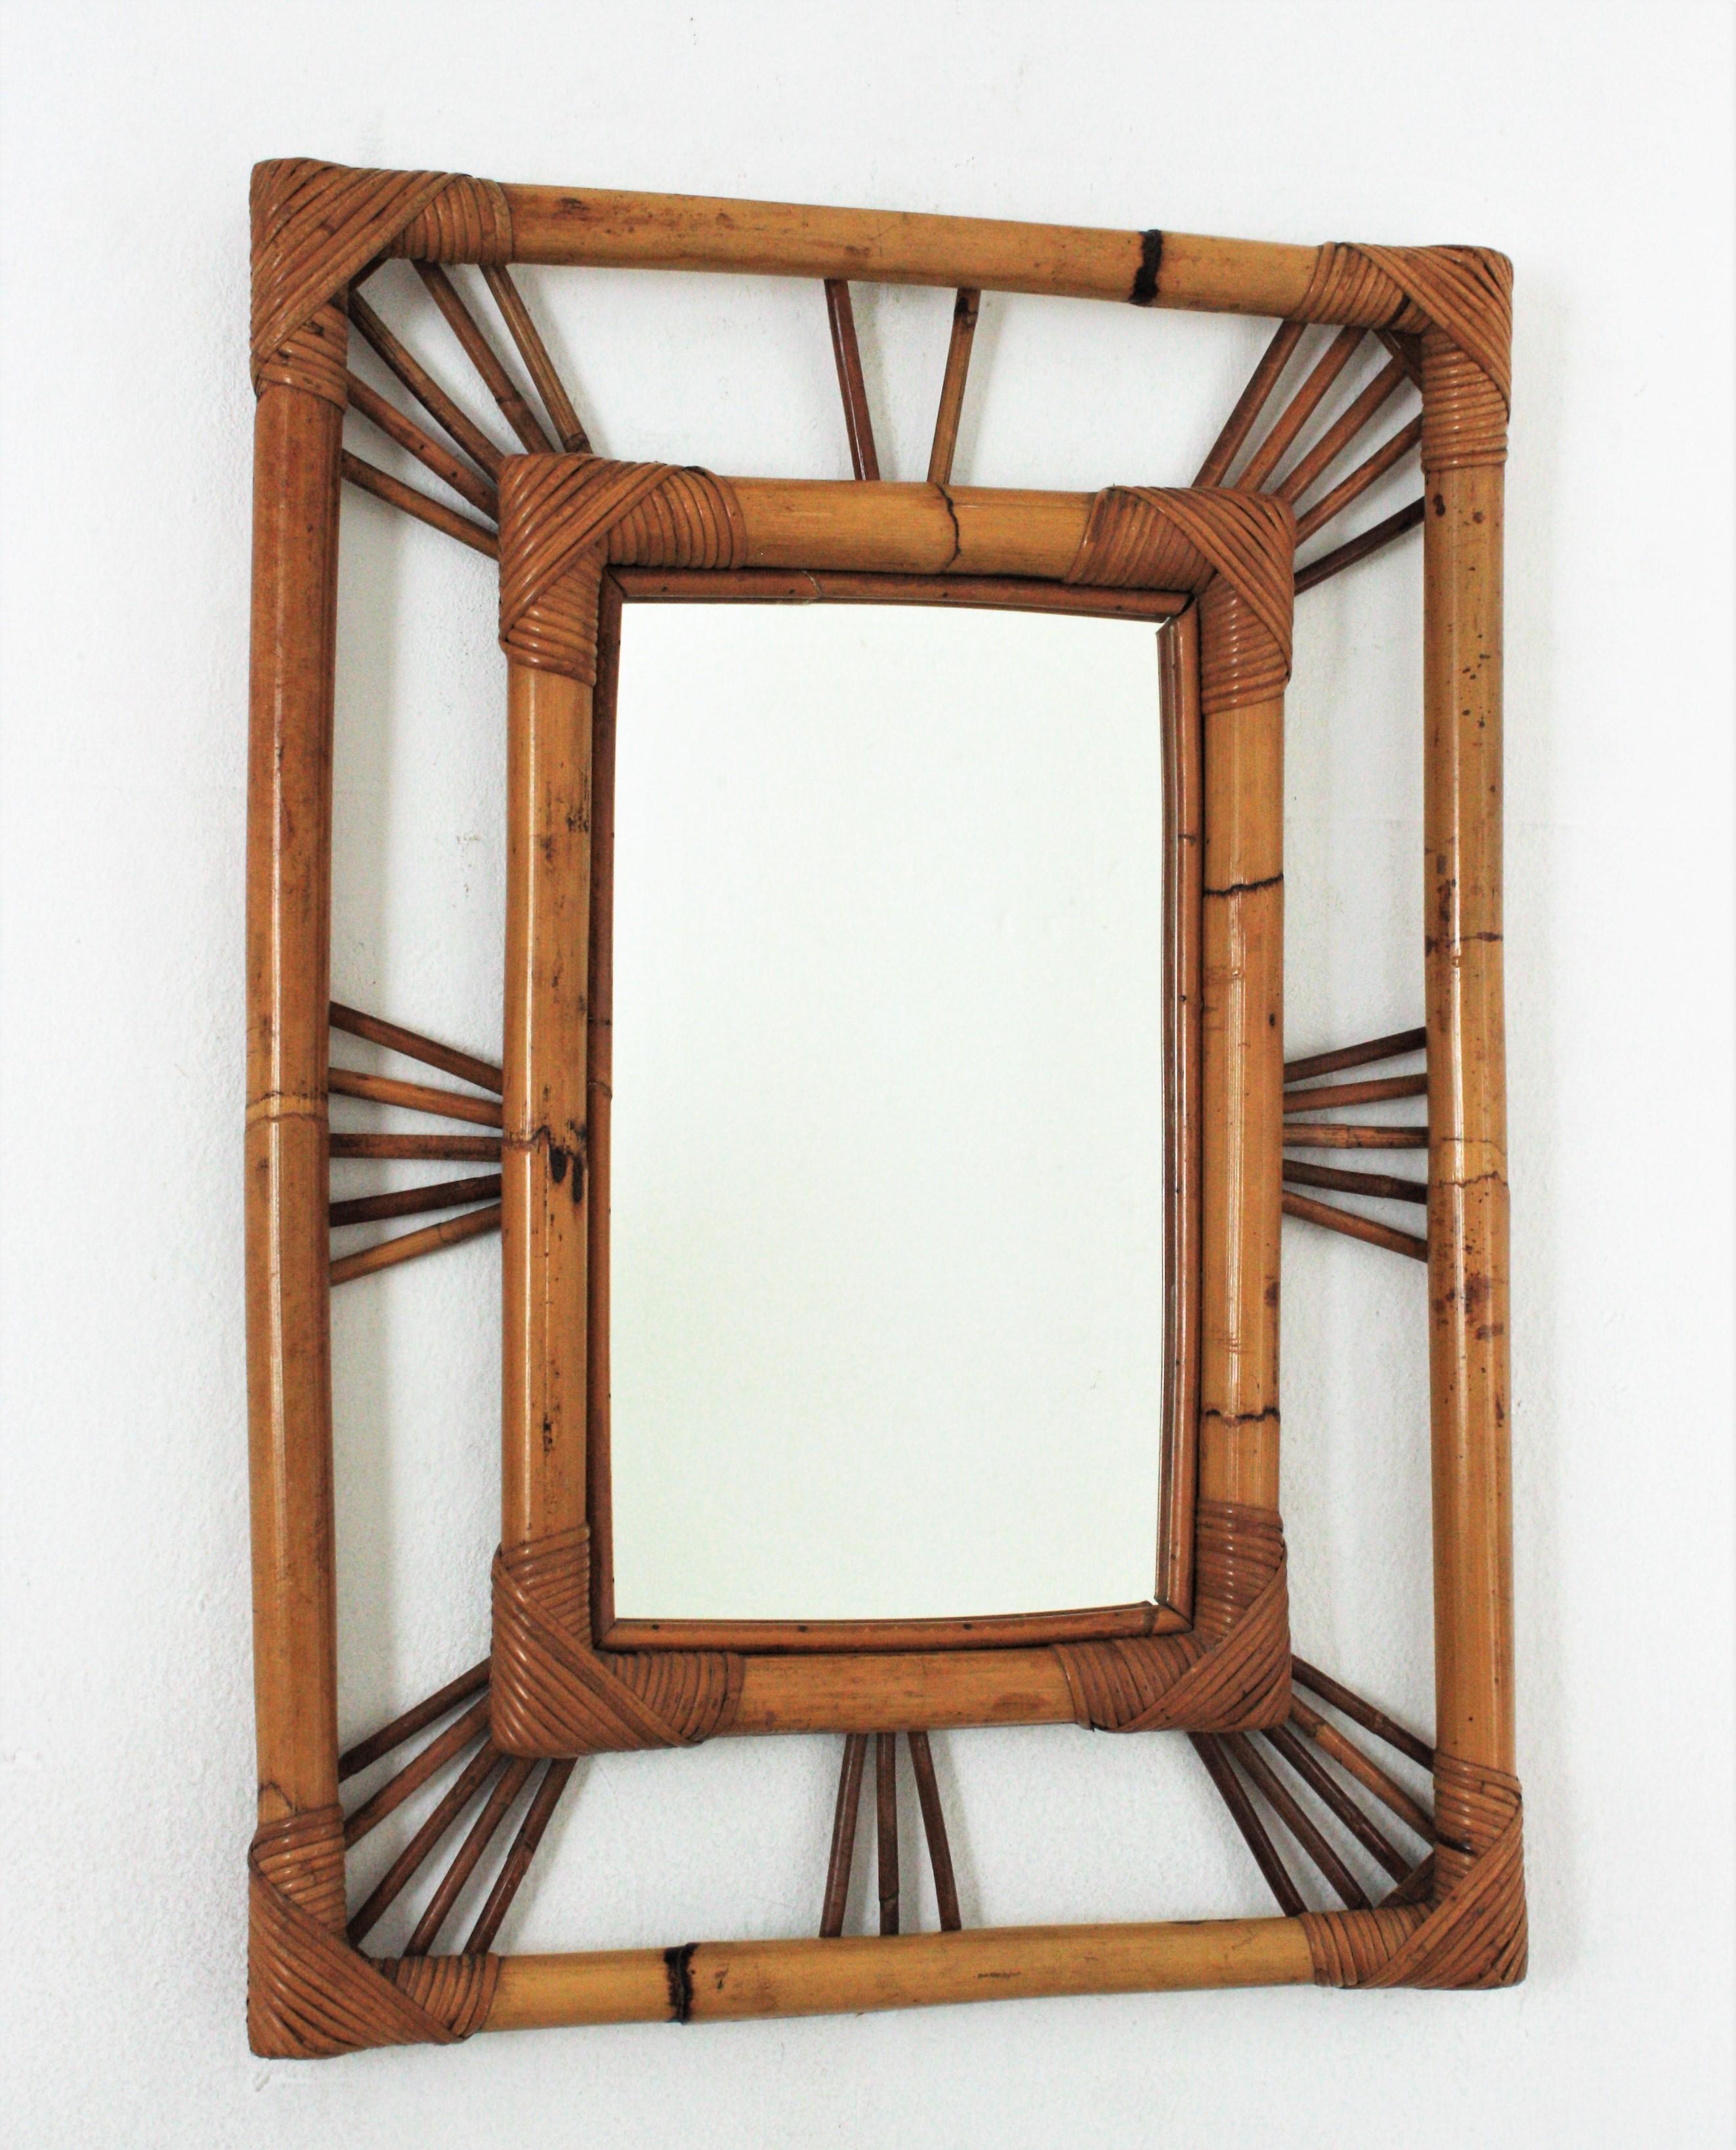 Eye-catching French Riviera rectangular mirror in rattan and bamboo. France, 1960s.
This wall mirror features a bamboo double frame surrounding a central glass. Rattan canes in sunburst disposition joining the bamboo frames.
This piece has all the